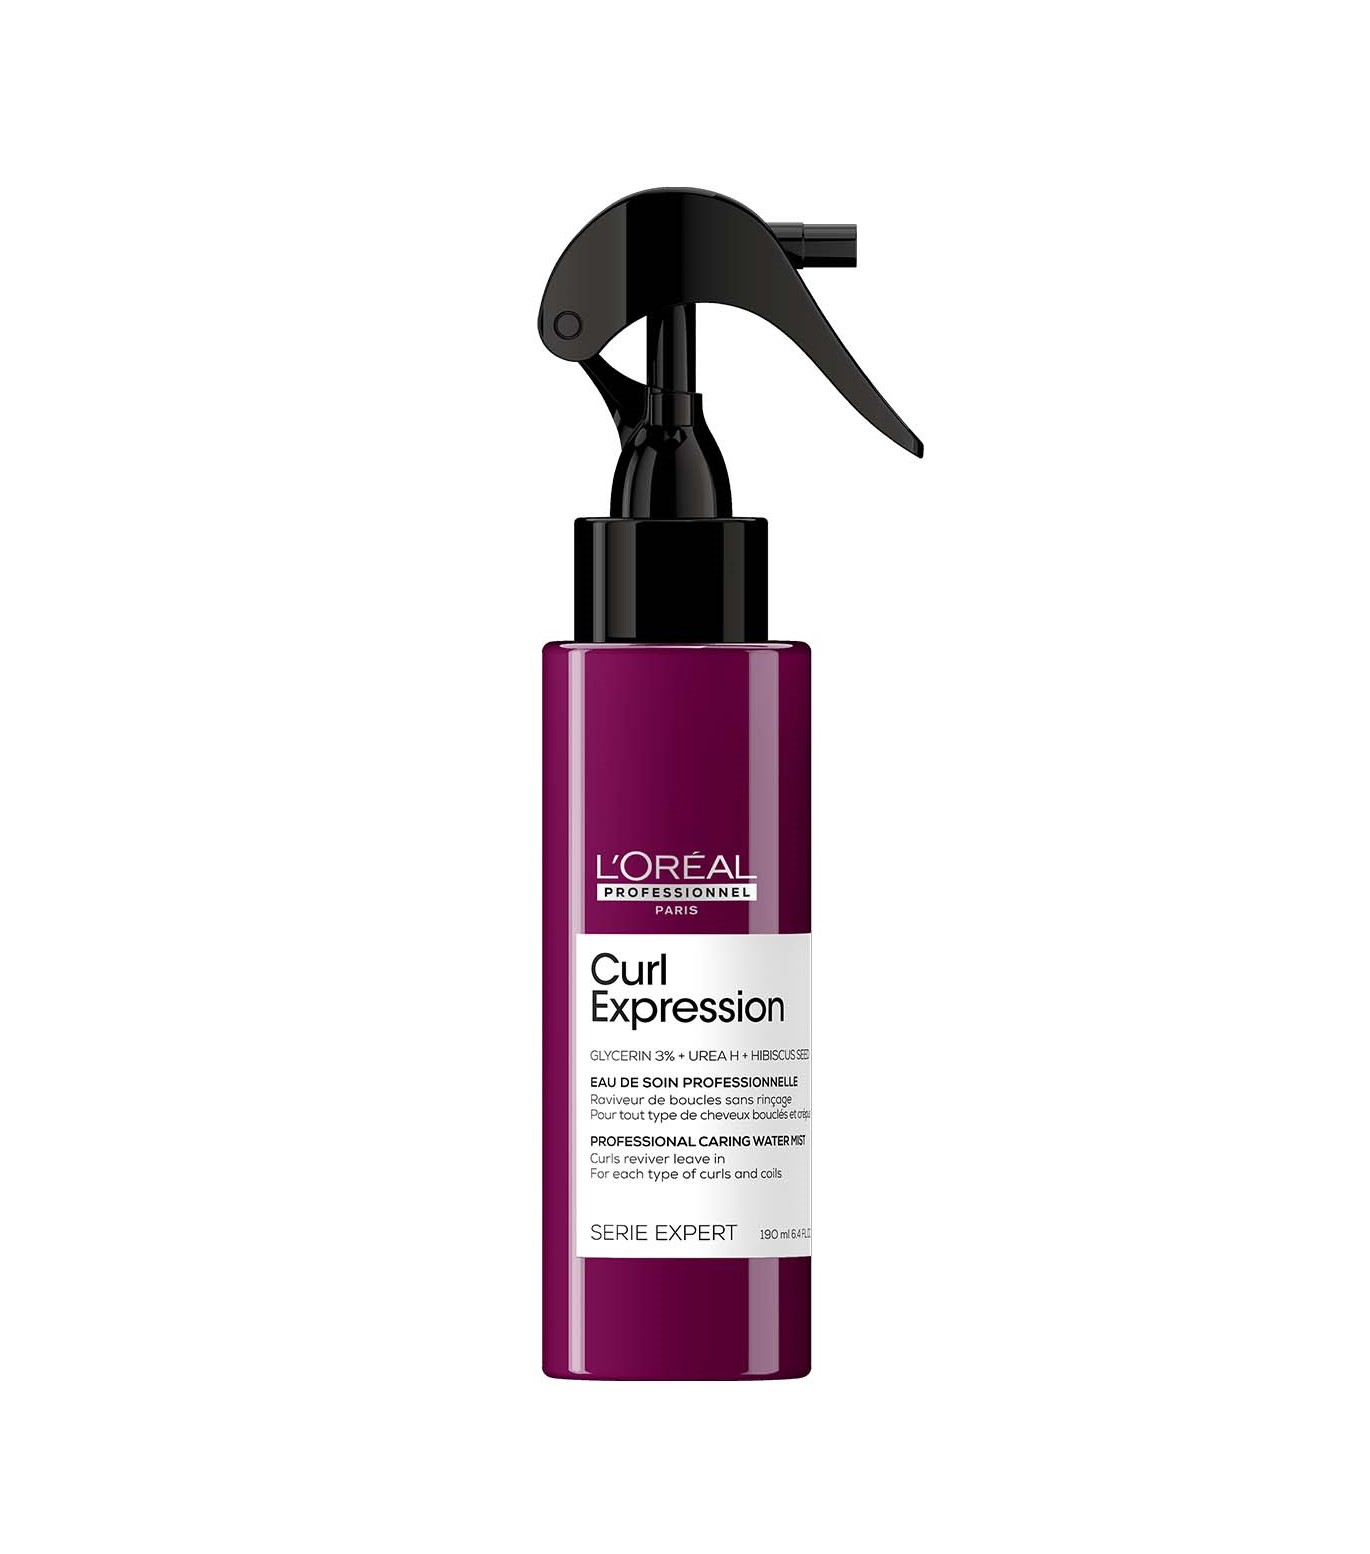 L'Oreal Professionnel Curl Expression Curls Reviver Leave-In 190ml